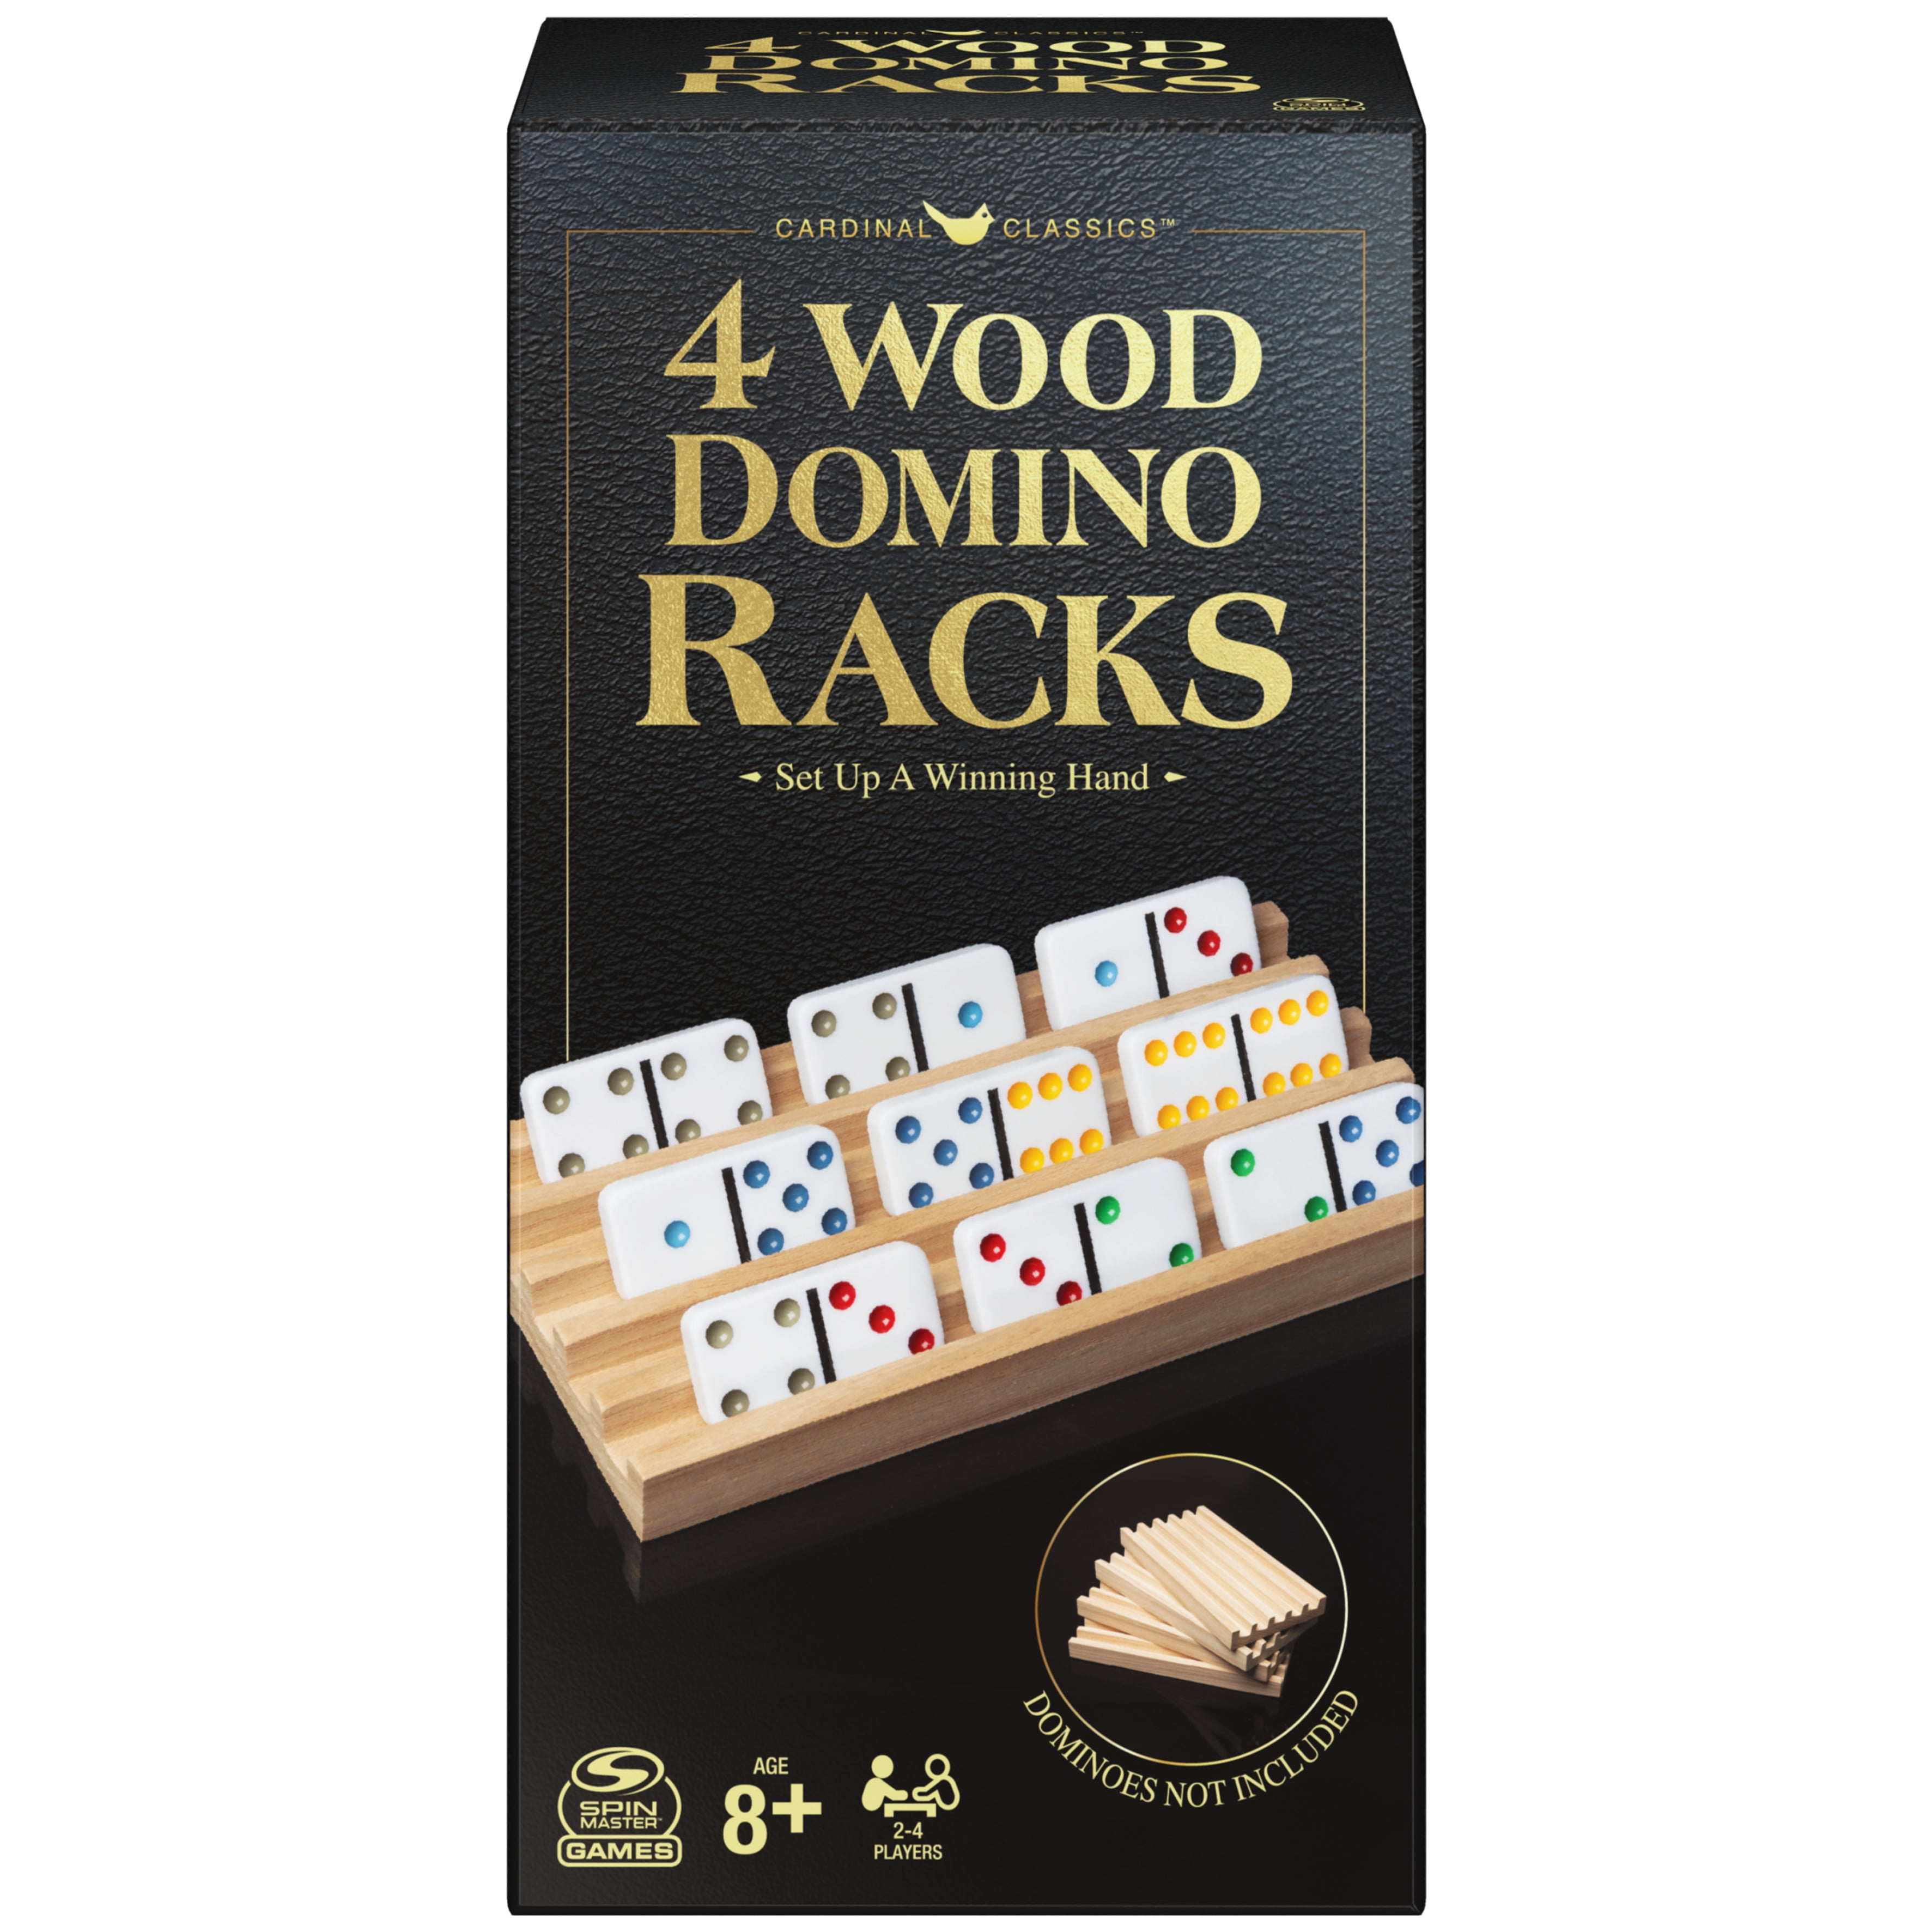 Wood Domino Racks, Set of 4 Trays for Mexican Train and other Dominoes Games, for Families and Kids Ages 8 and up